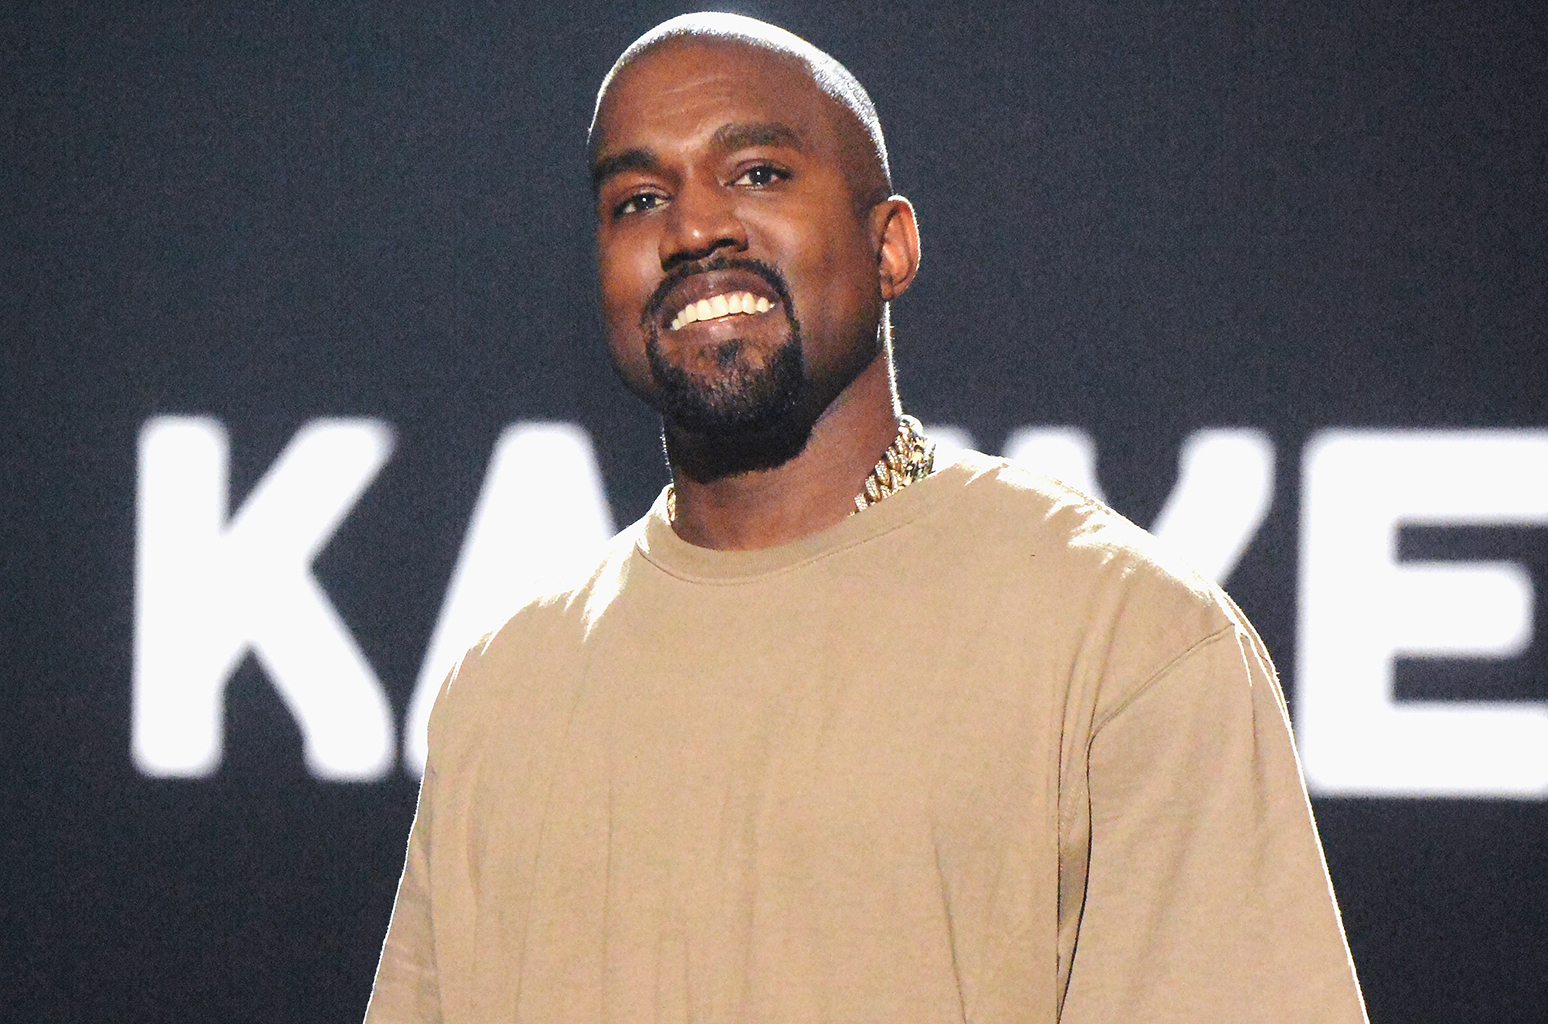 Kanye West heading to Africa to record ‘Yandhi’ album..Could it be Ghana?